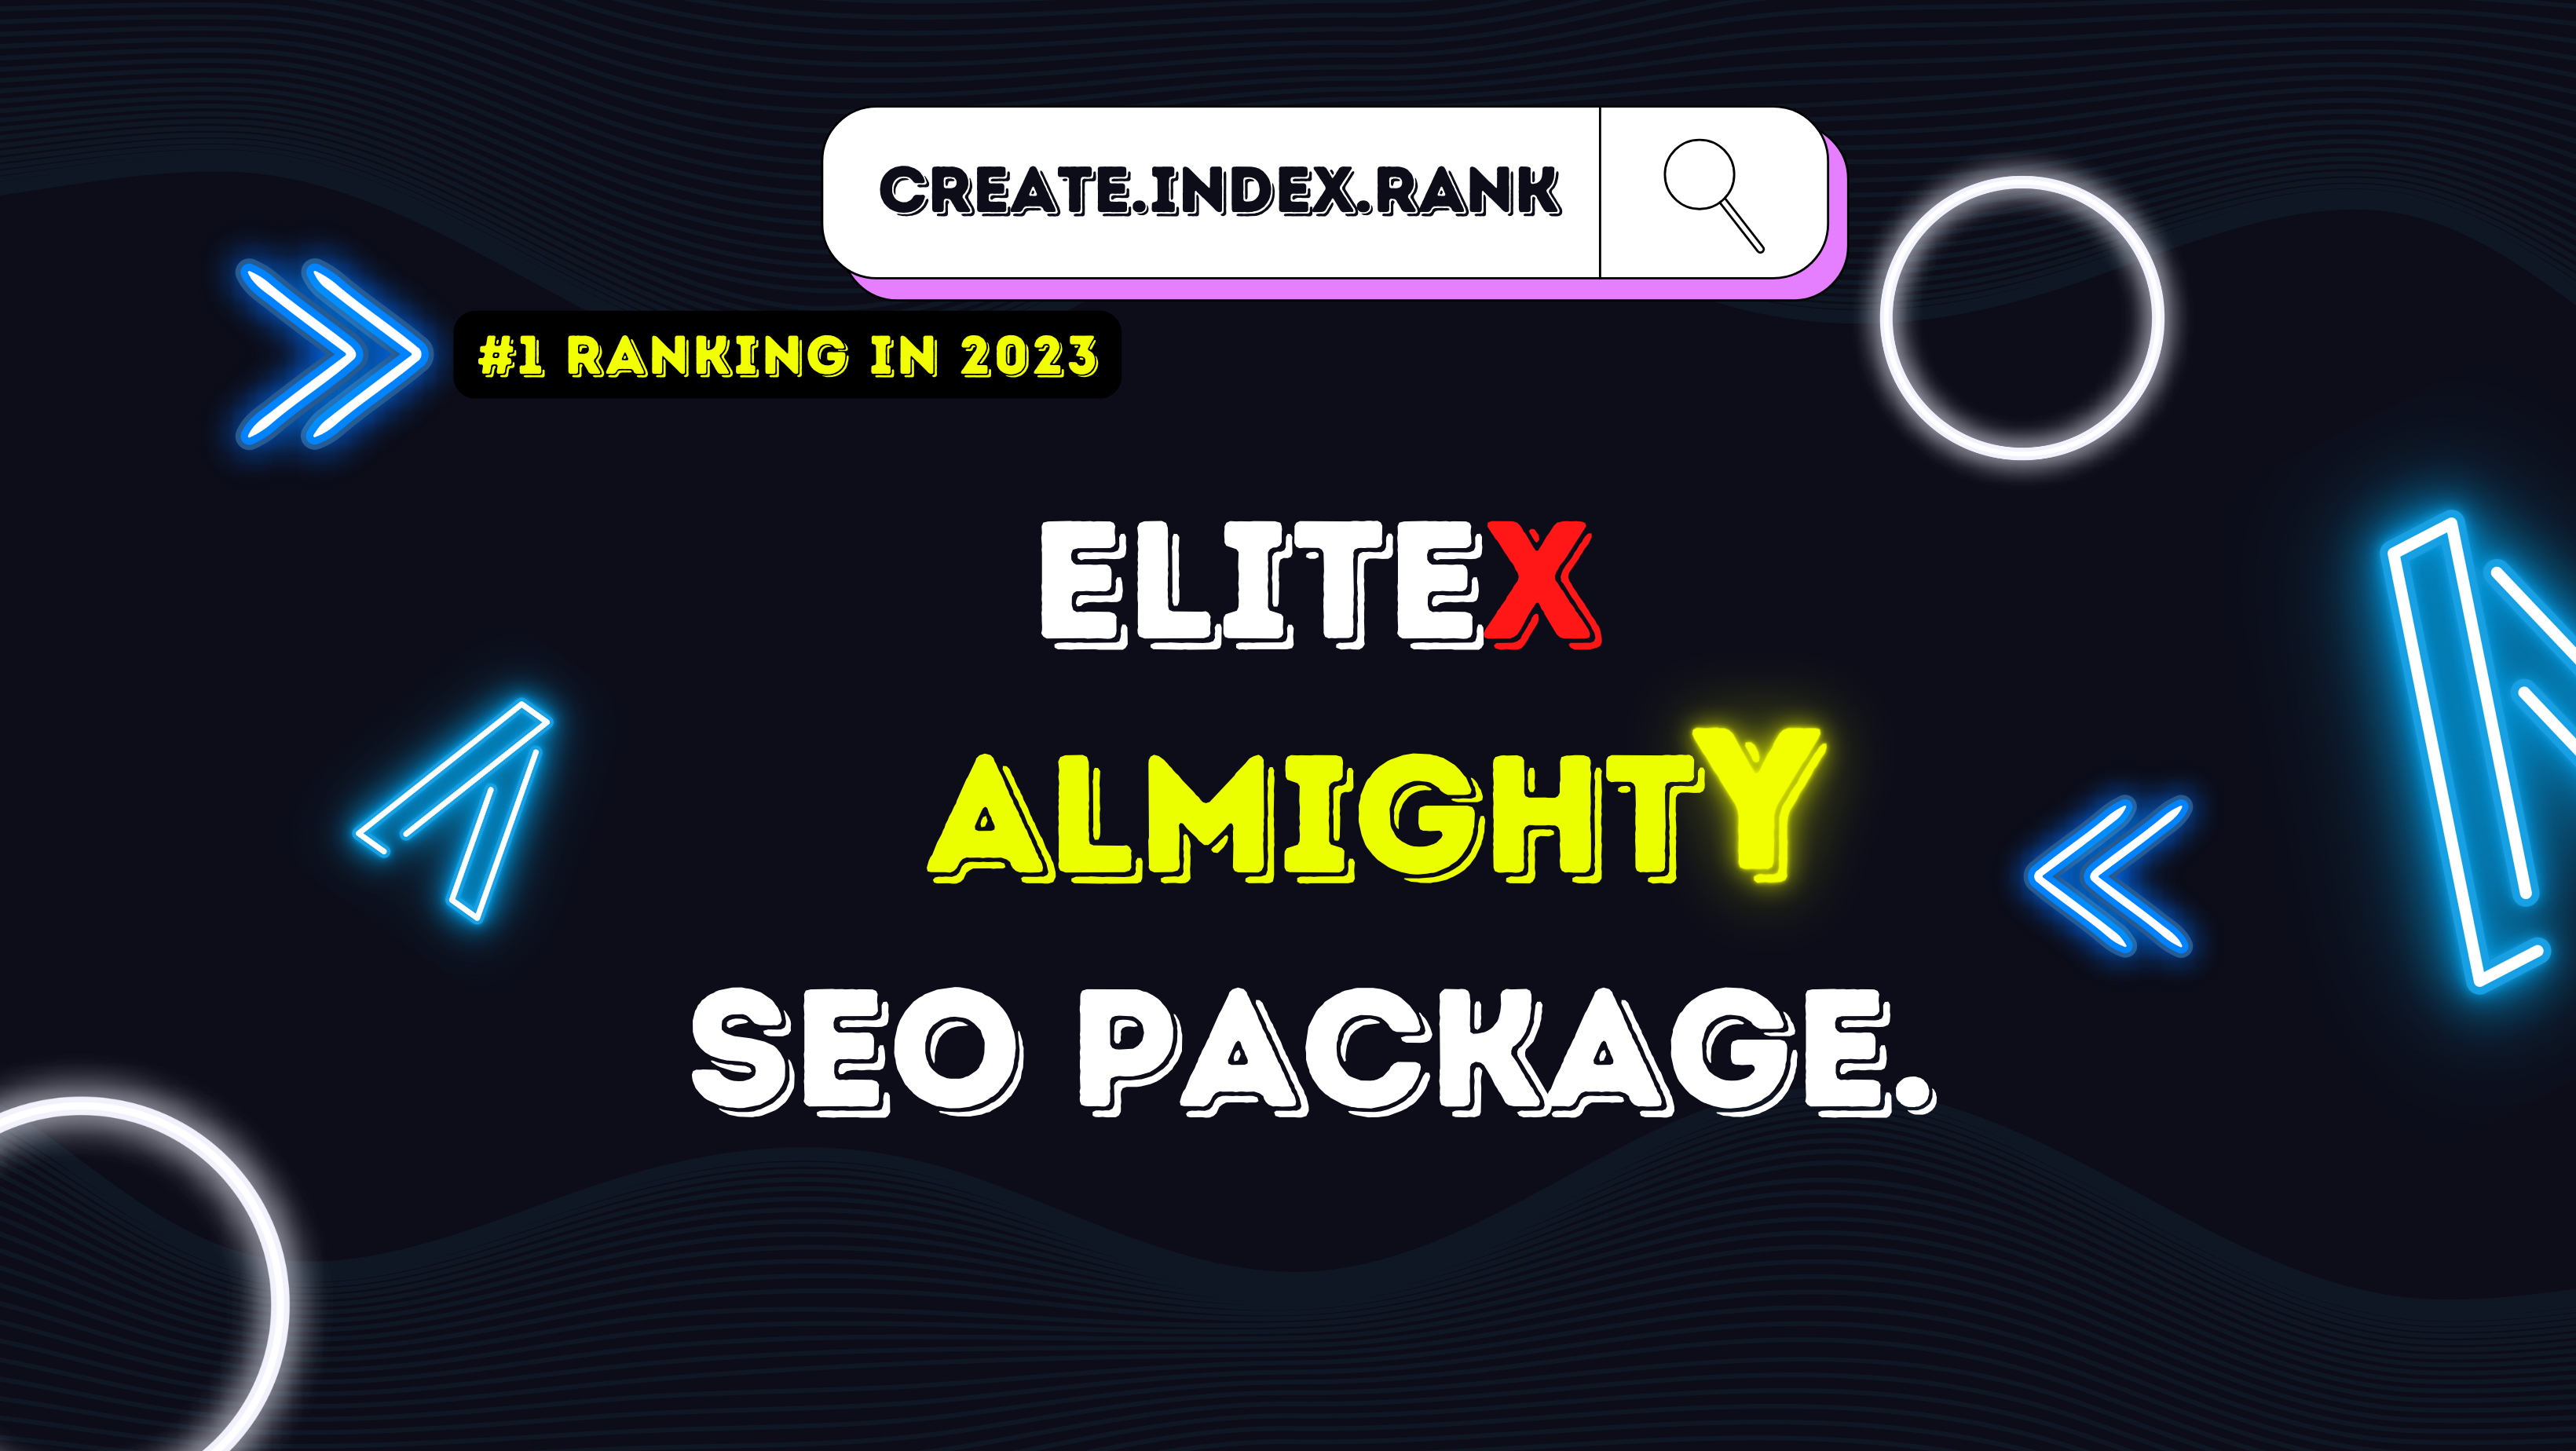 EliteX Almighty SEO PACK No 1 Ranking In 2023 - Boost Traffic & Sales